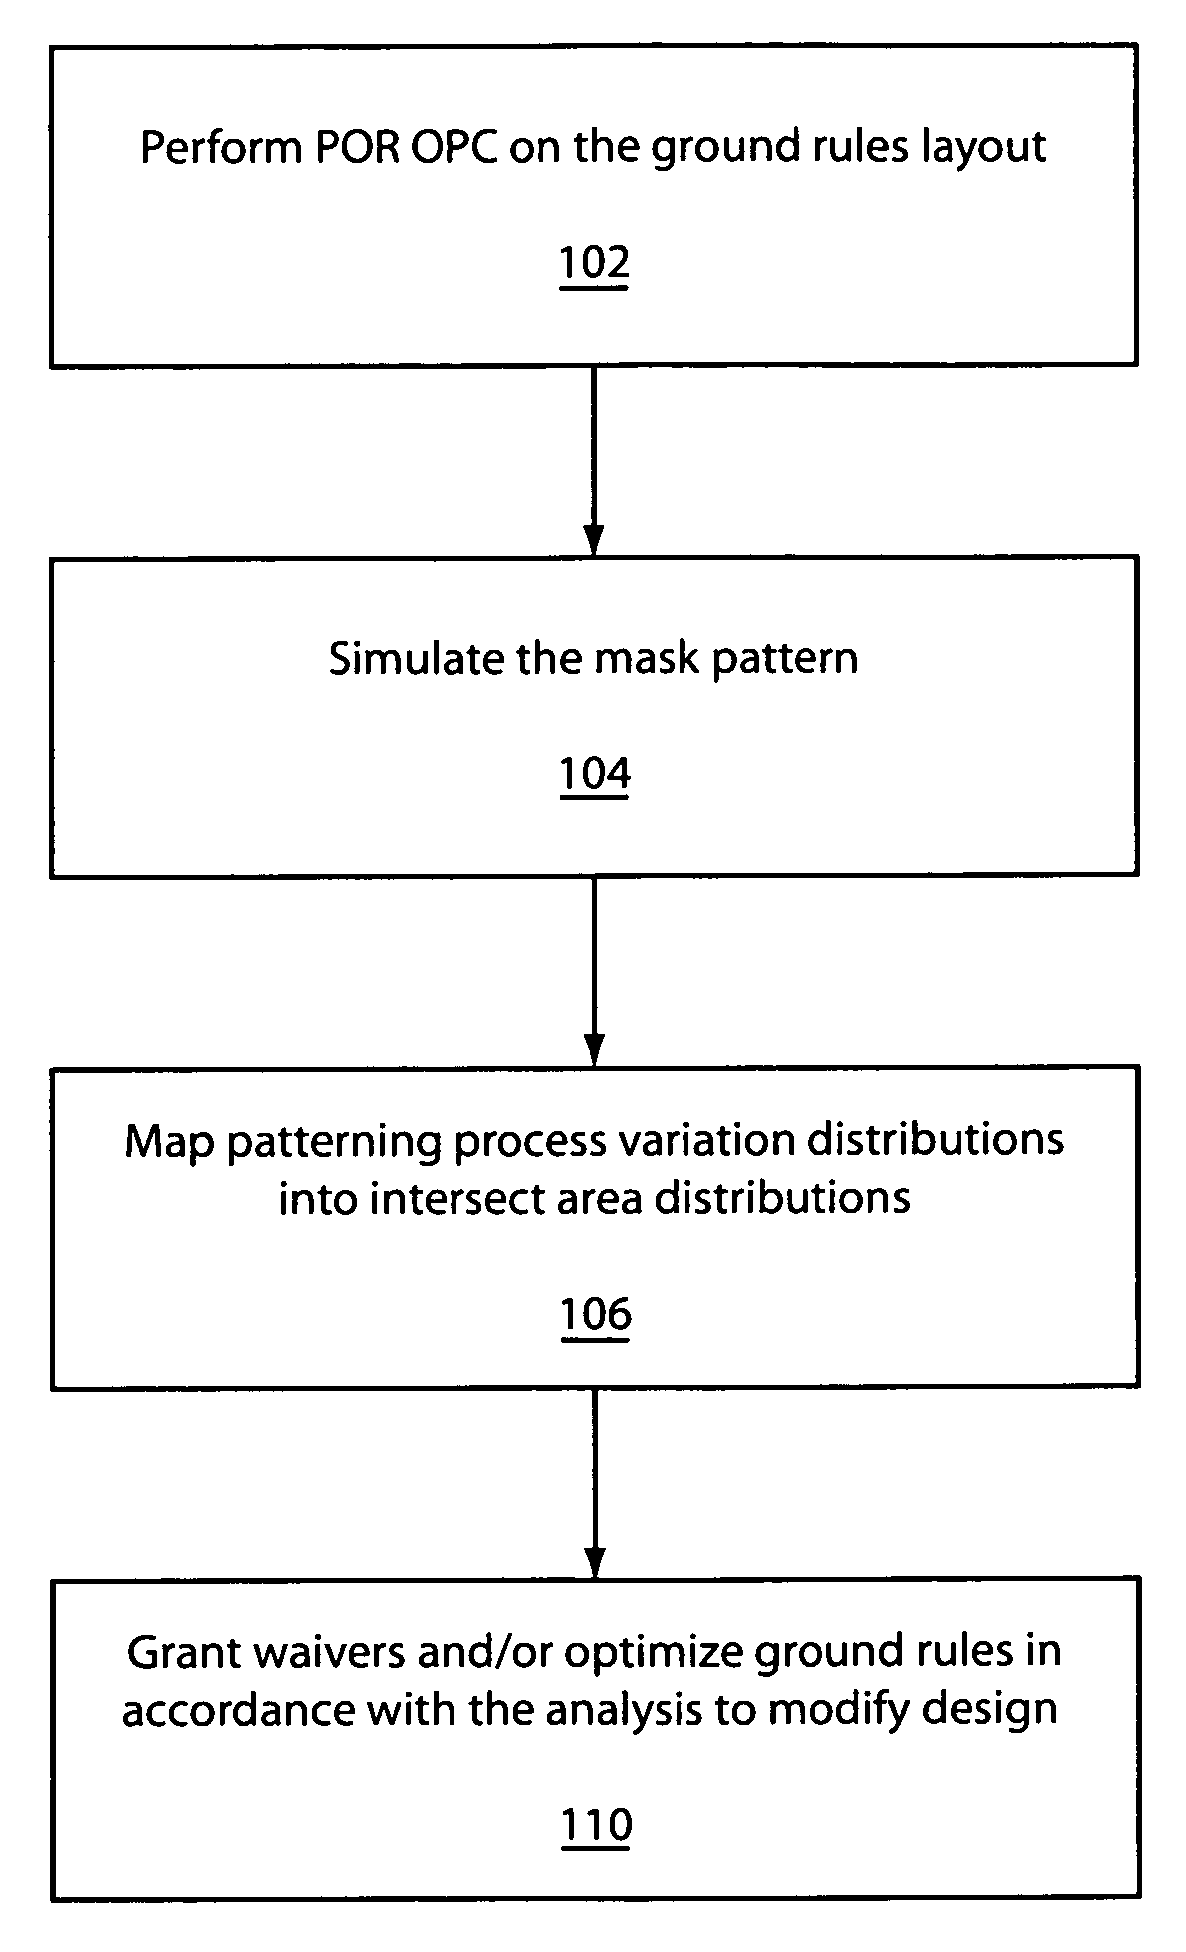 System and method for employing patterning process statistics for ground rules waivers and optimization